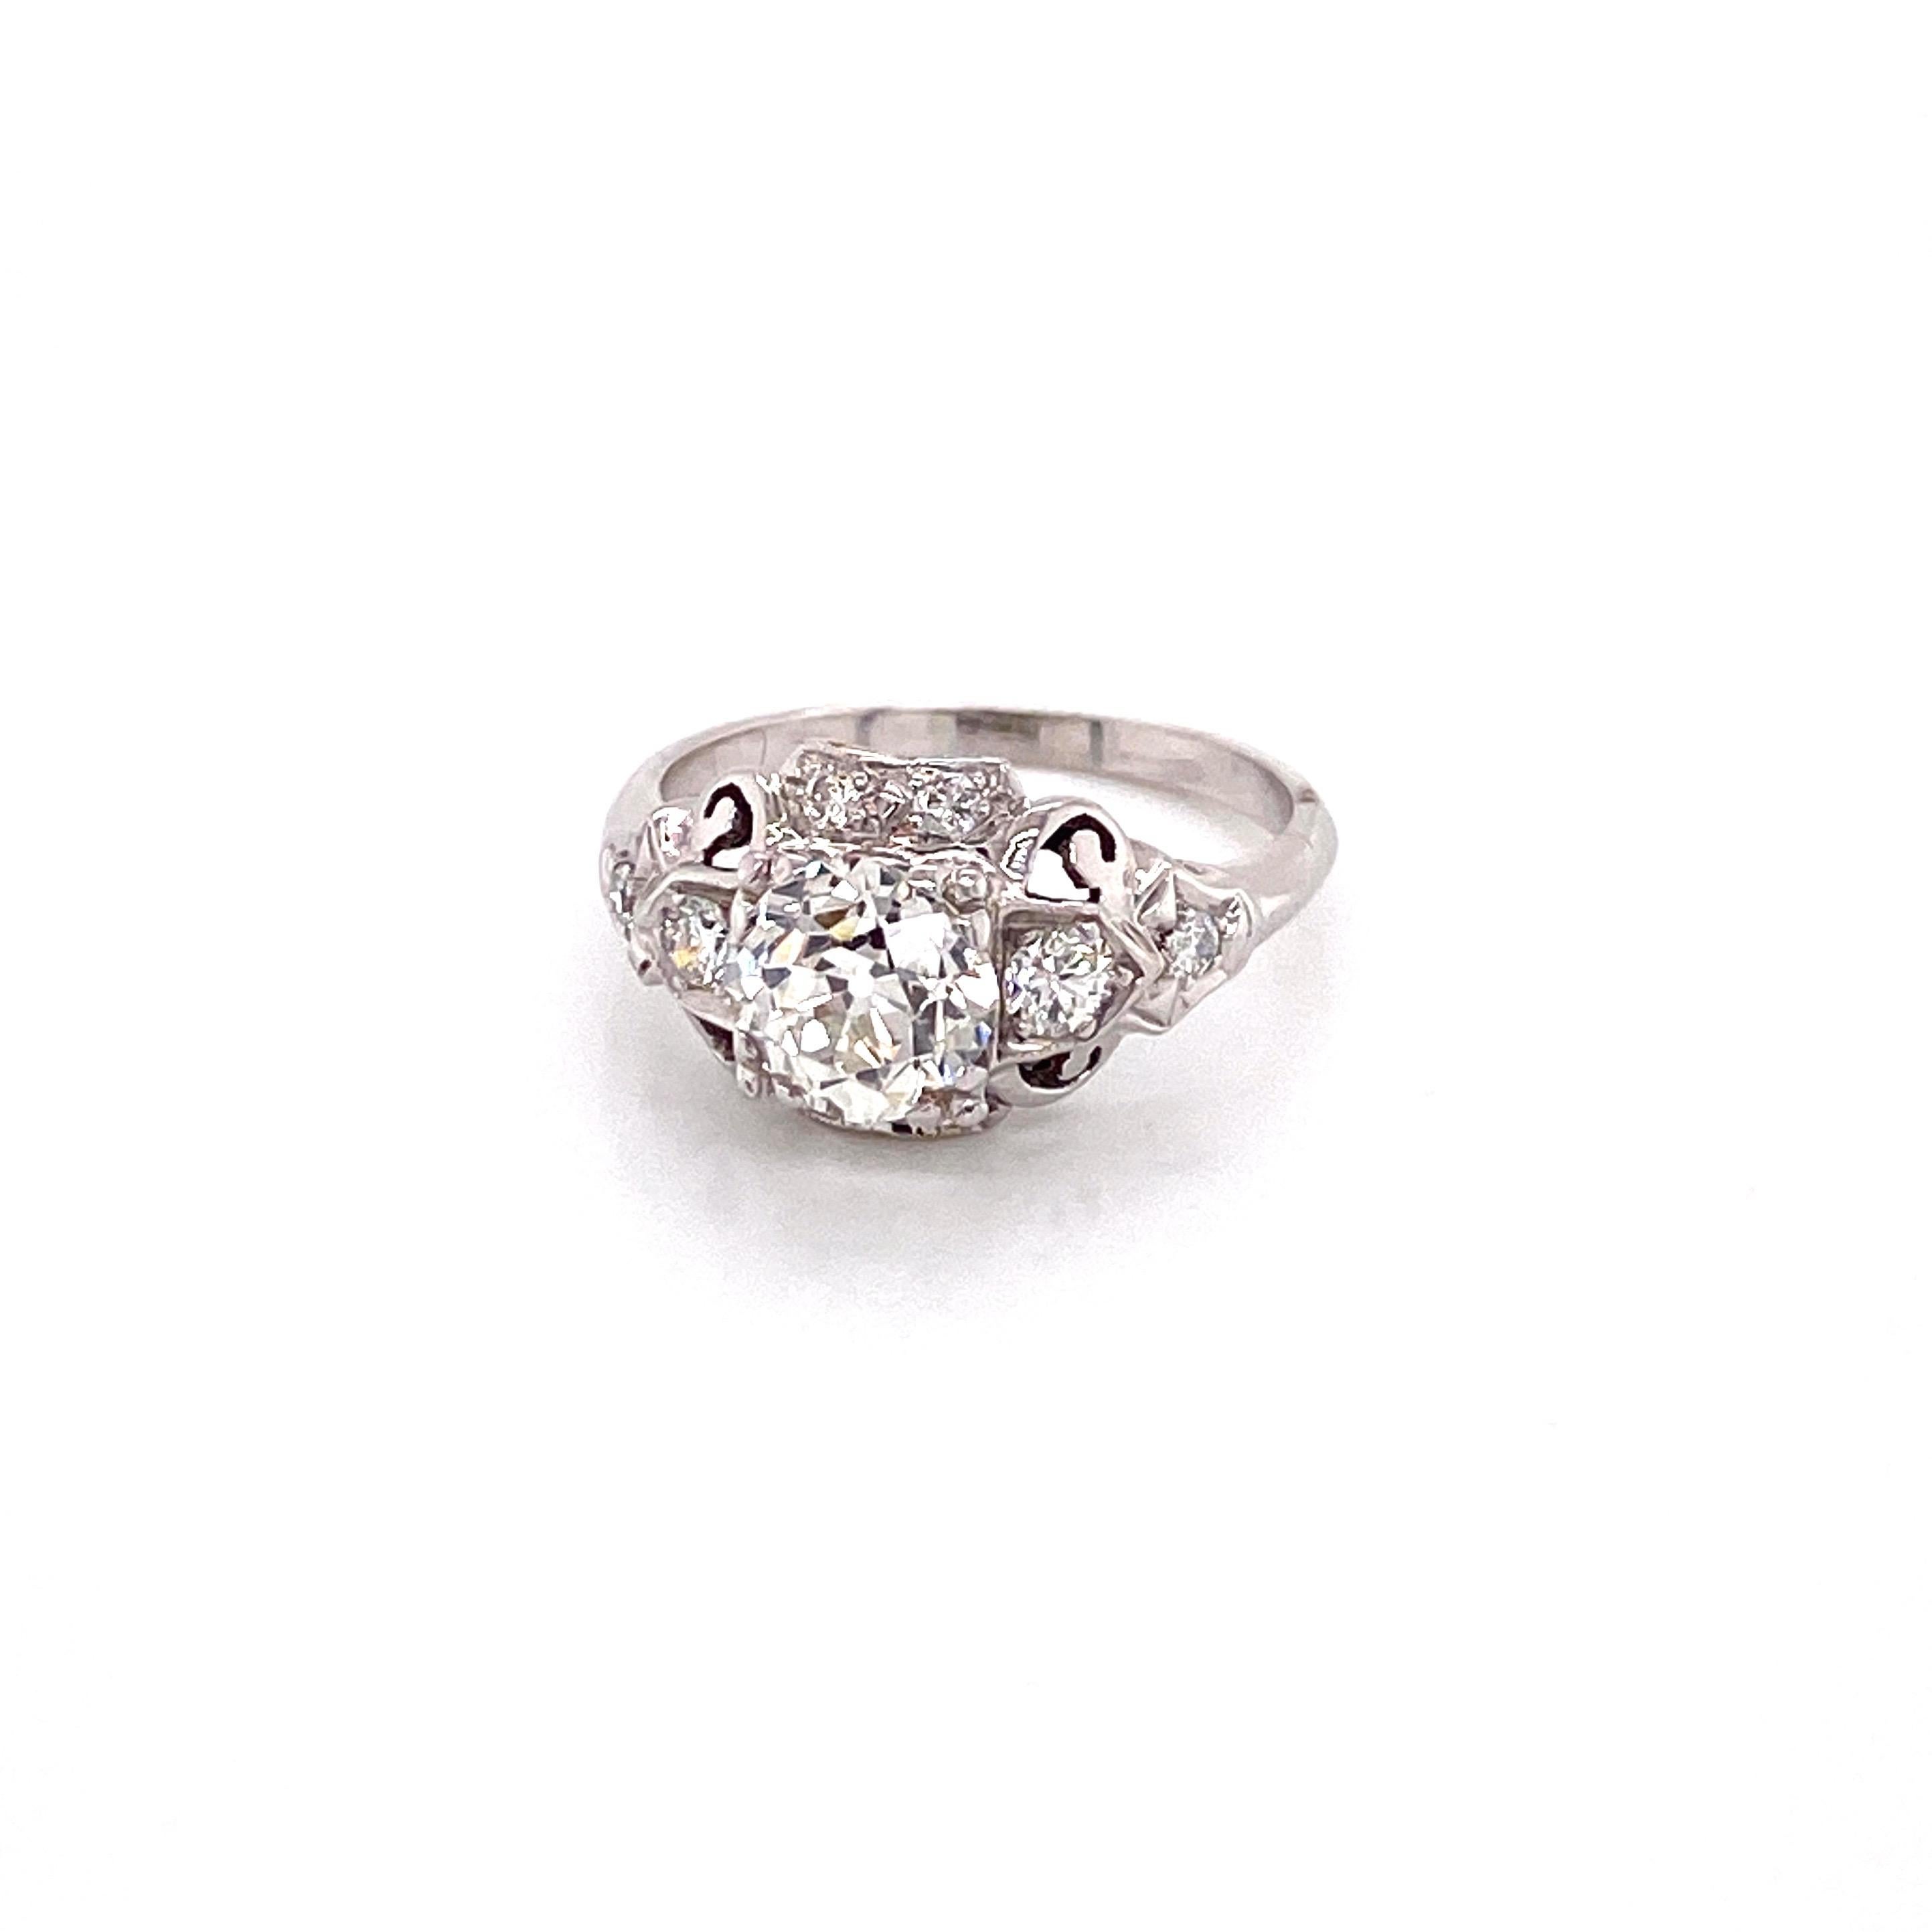 Vintage 1950s White Gold European Cut Diamond Filigree Ring - The center Old European Cut diamond weighs 1.20ct and is an I color and SI1 clarity. The diamond is set prominently in square fishtail prongs with 8 full cut diamonds accented on the